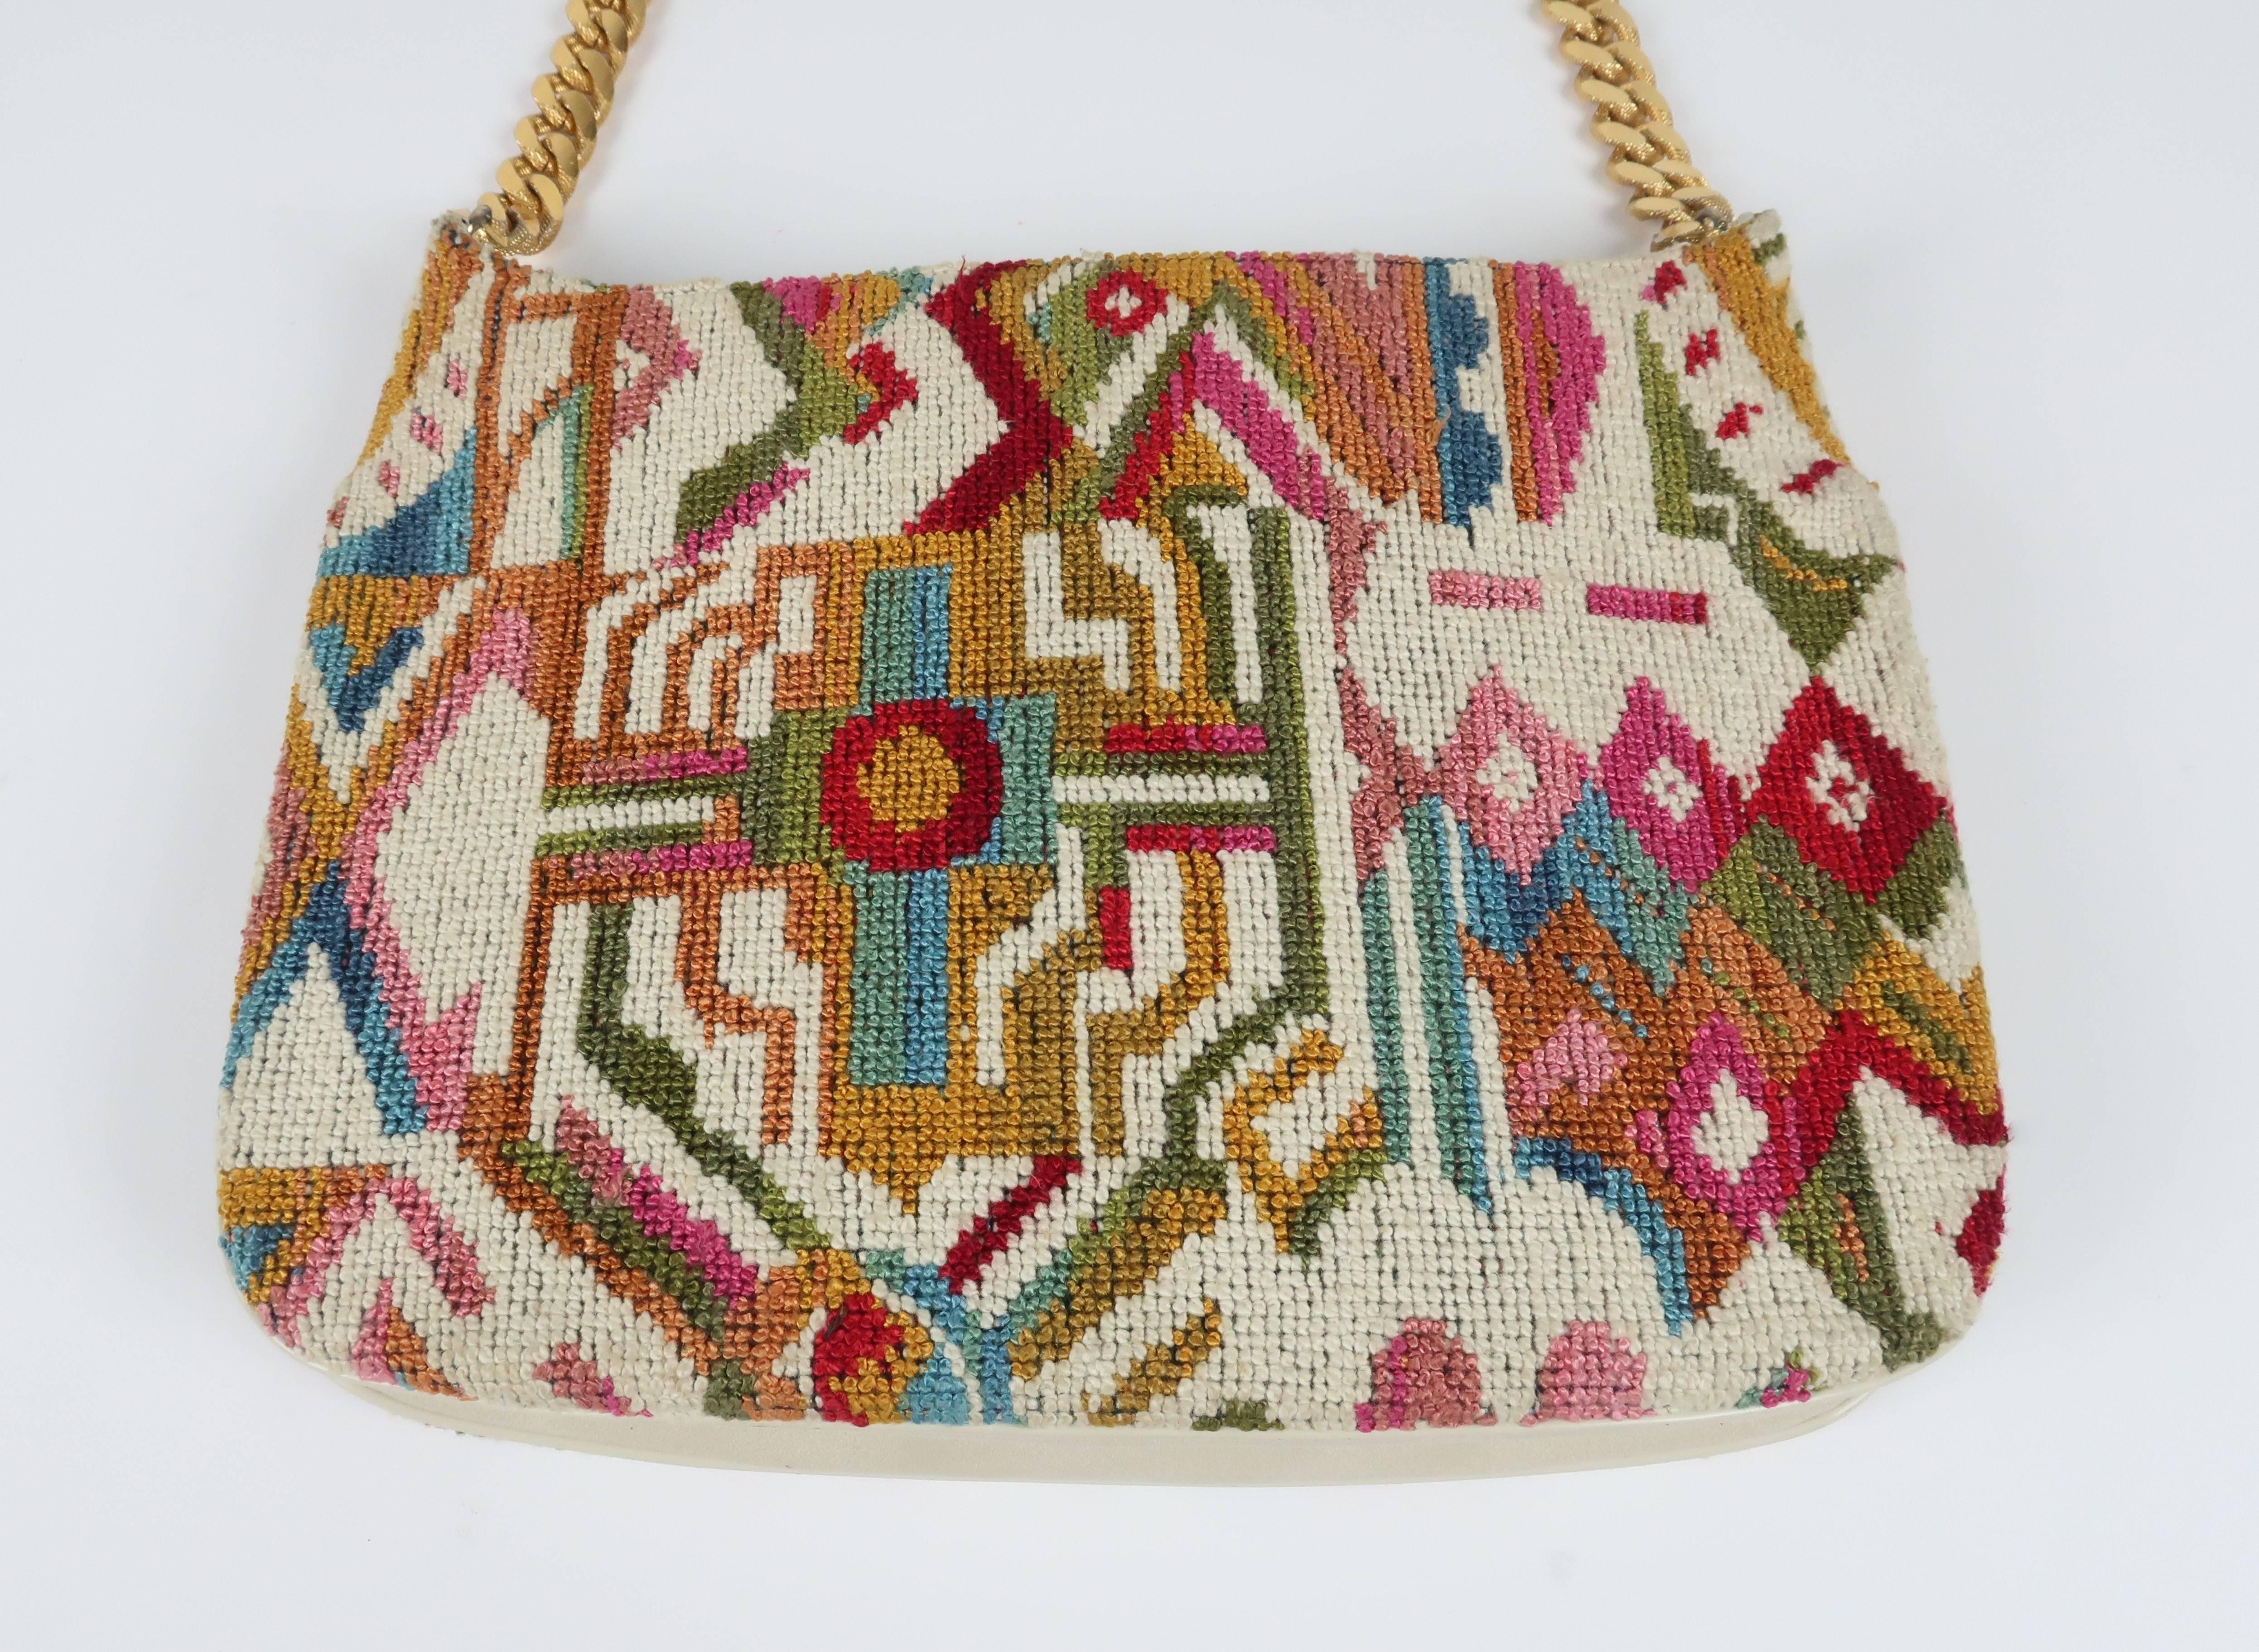 Fun and functionality!  Meyers always stayed on top of the fashion trends with well made and affordable handbags such as this C.1970 needlepoint bag with a colorful geometric design reminiscent of Navajo prints.  The texture and colors were as